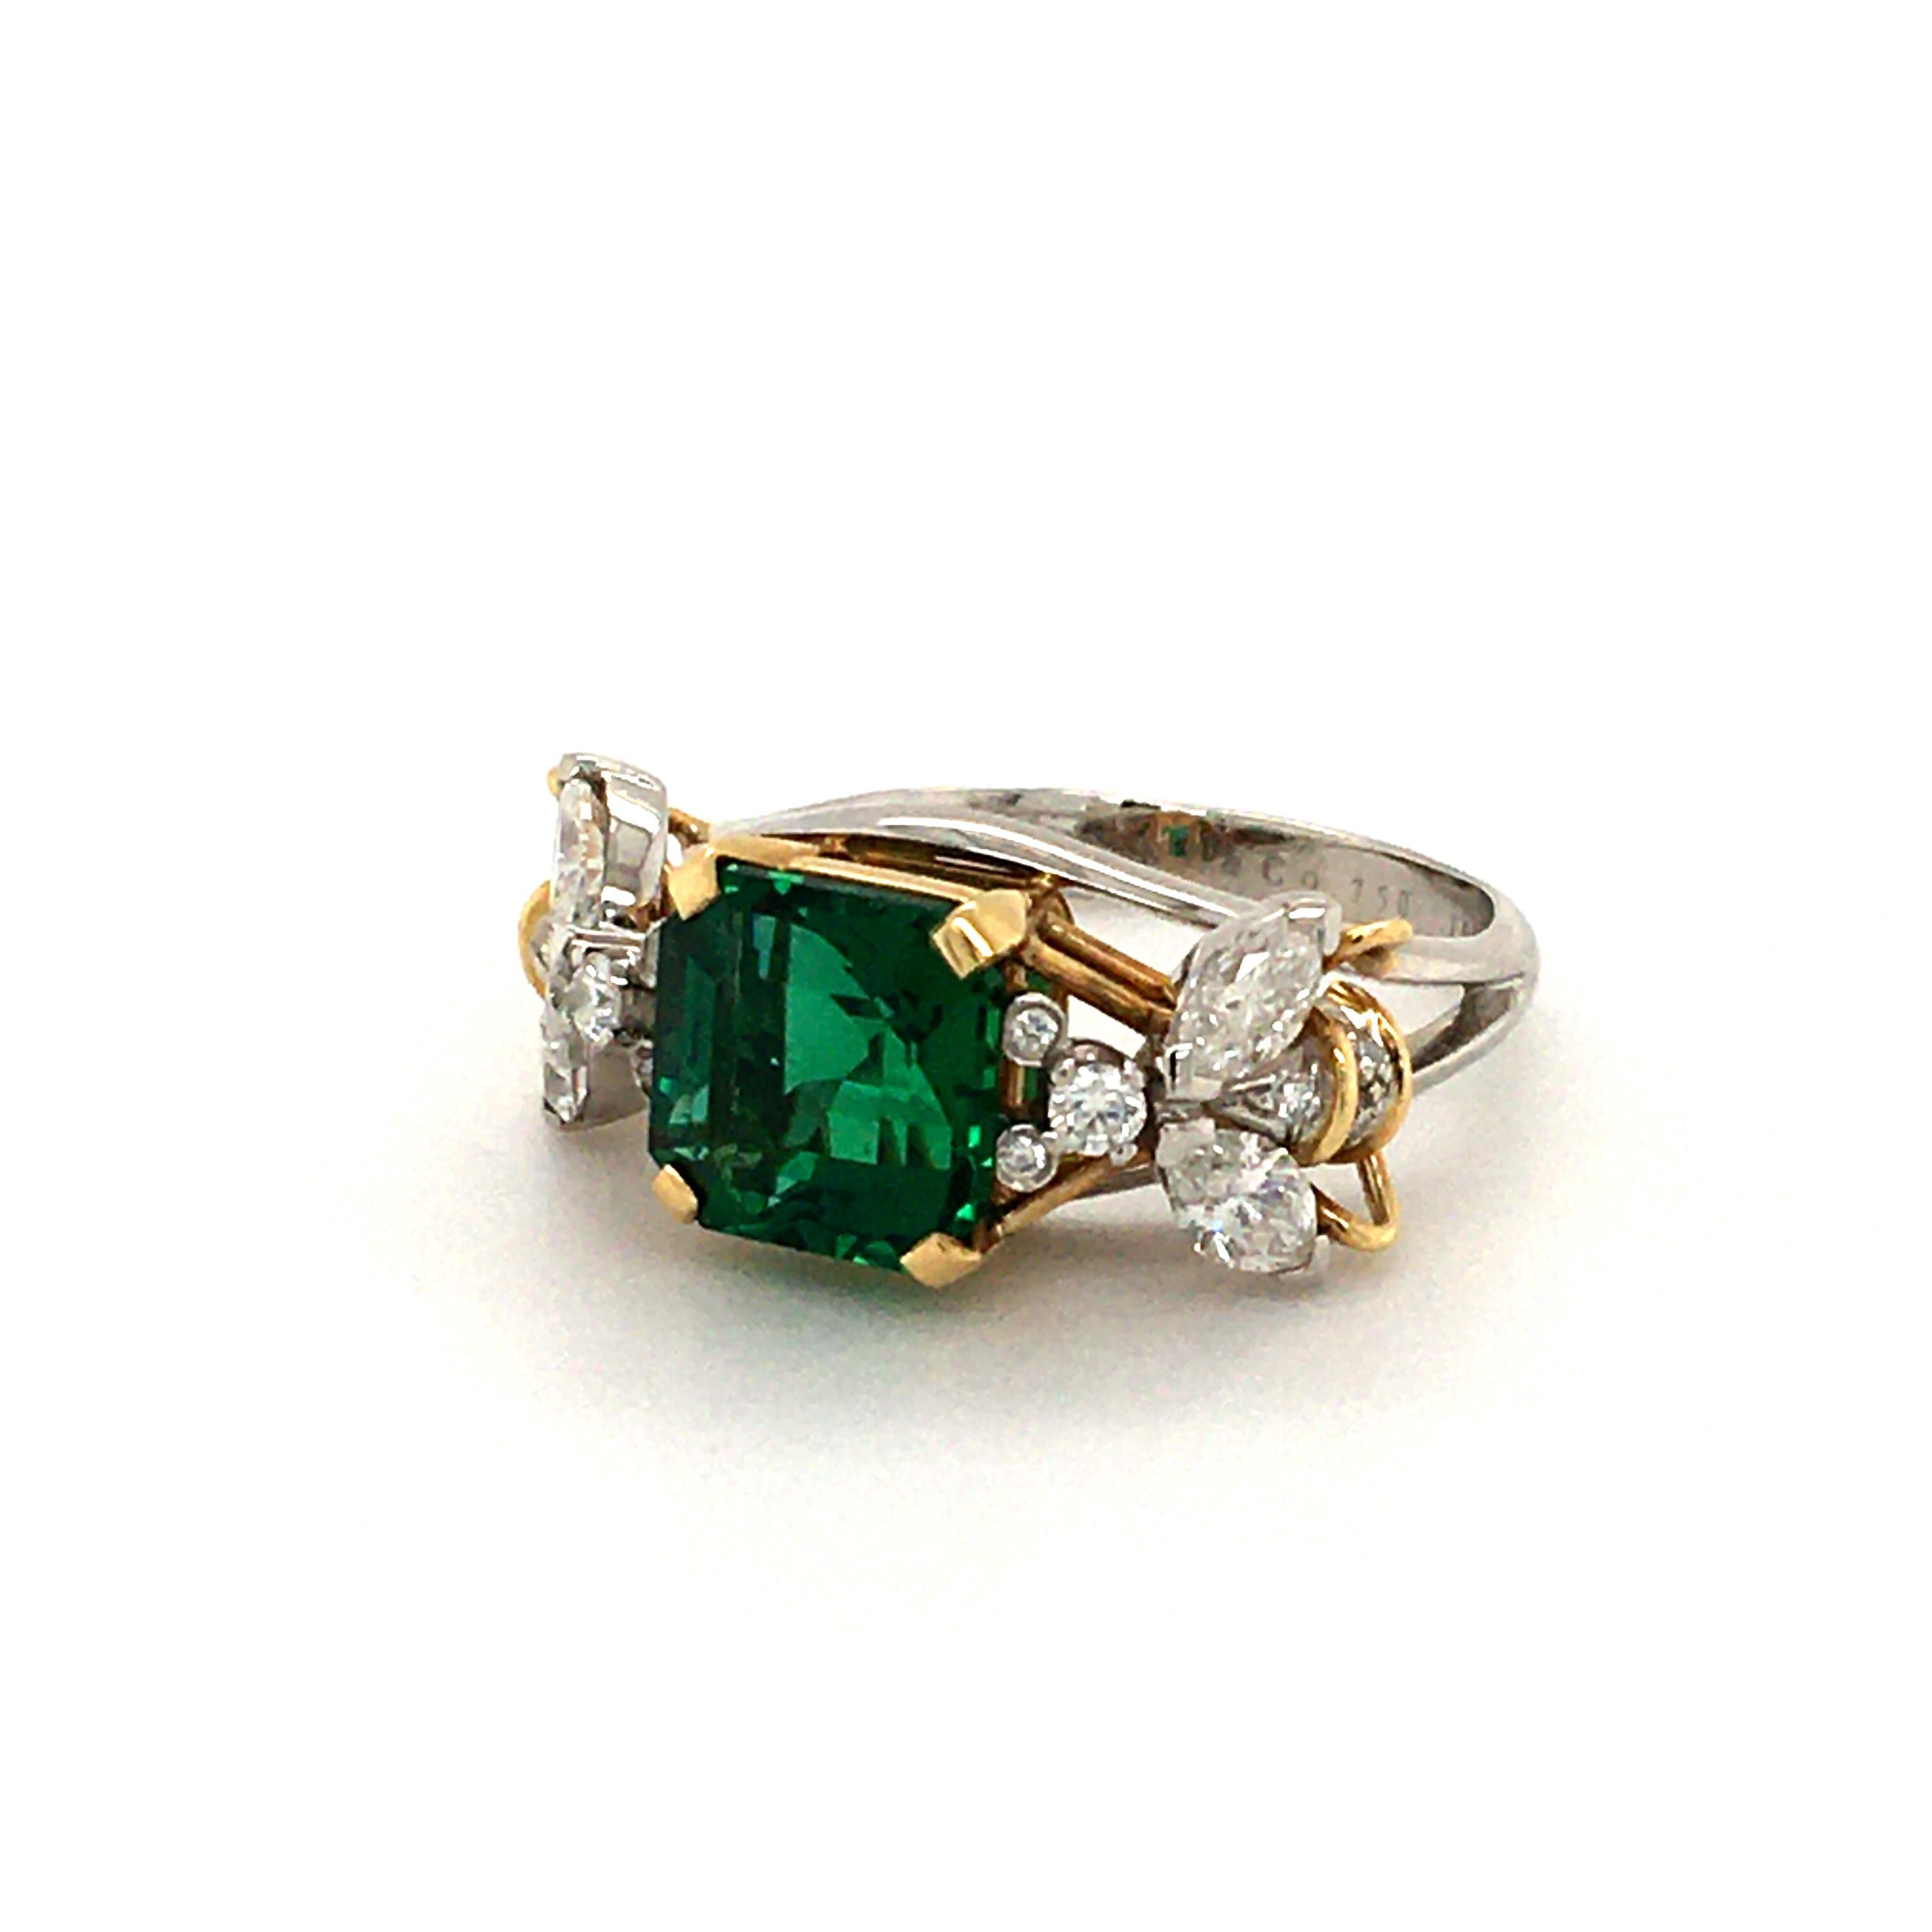 Emerald Cut Emerald and Diamond 'Two Bees' Ring, by Jean Schlumberger for Tiffany & Co. For Sale